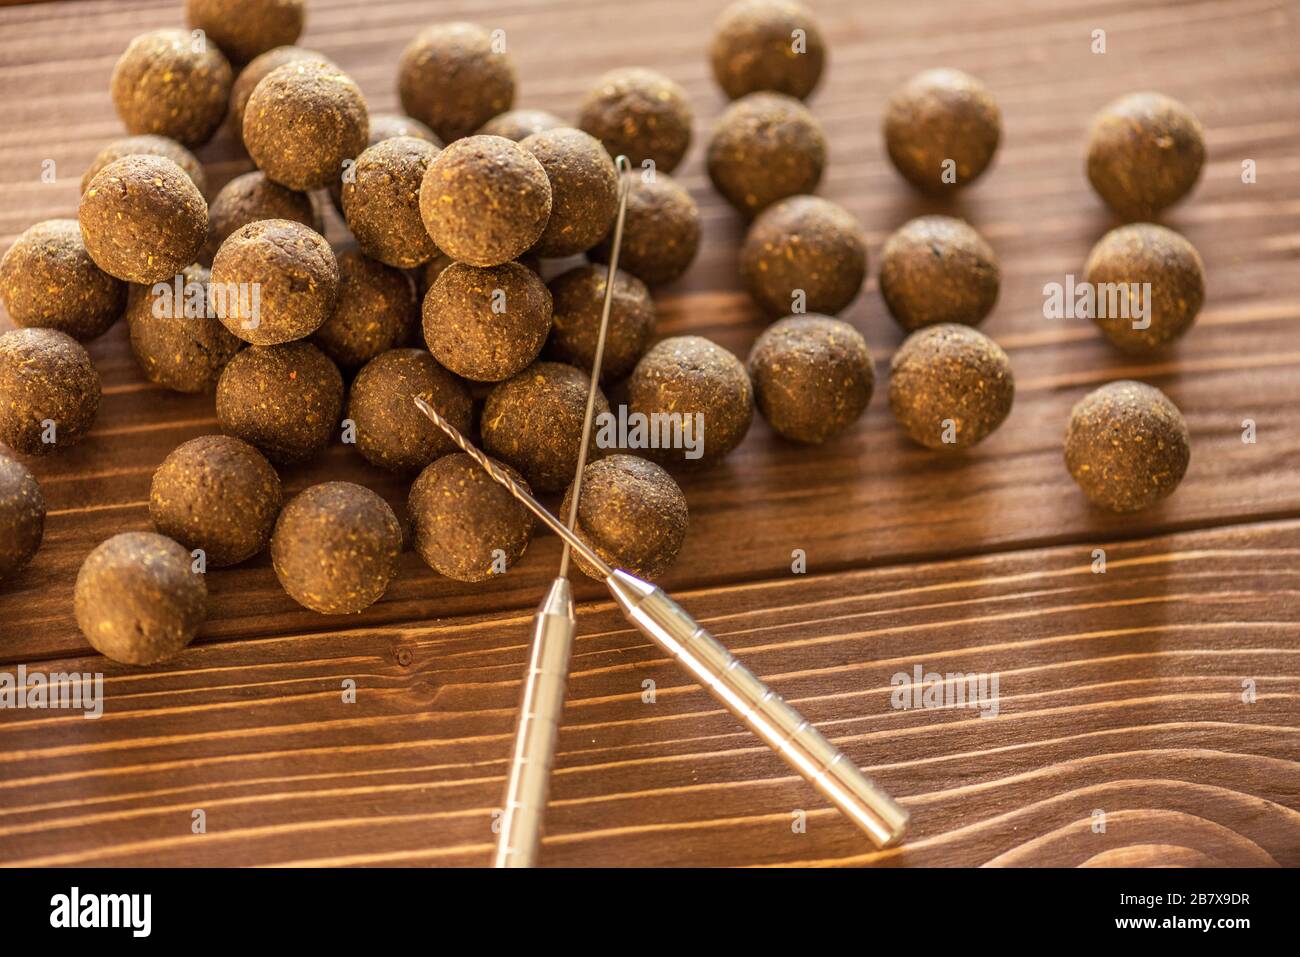 Dry Feed For Carp Fishing Carp Boilies And Accessories Stock Photo -  Download Image Now - iStock